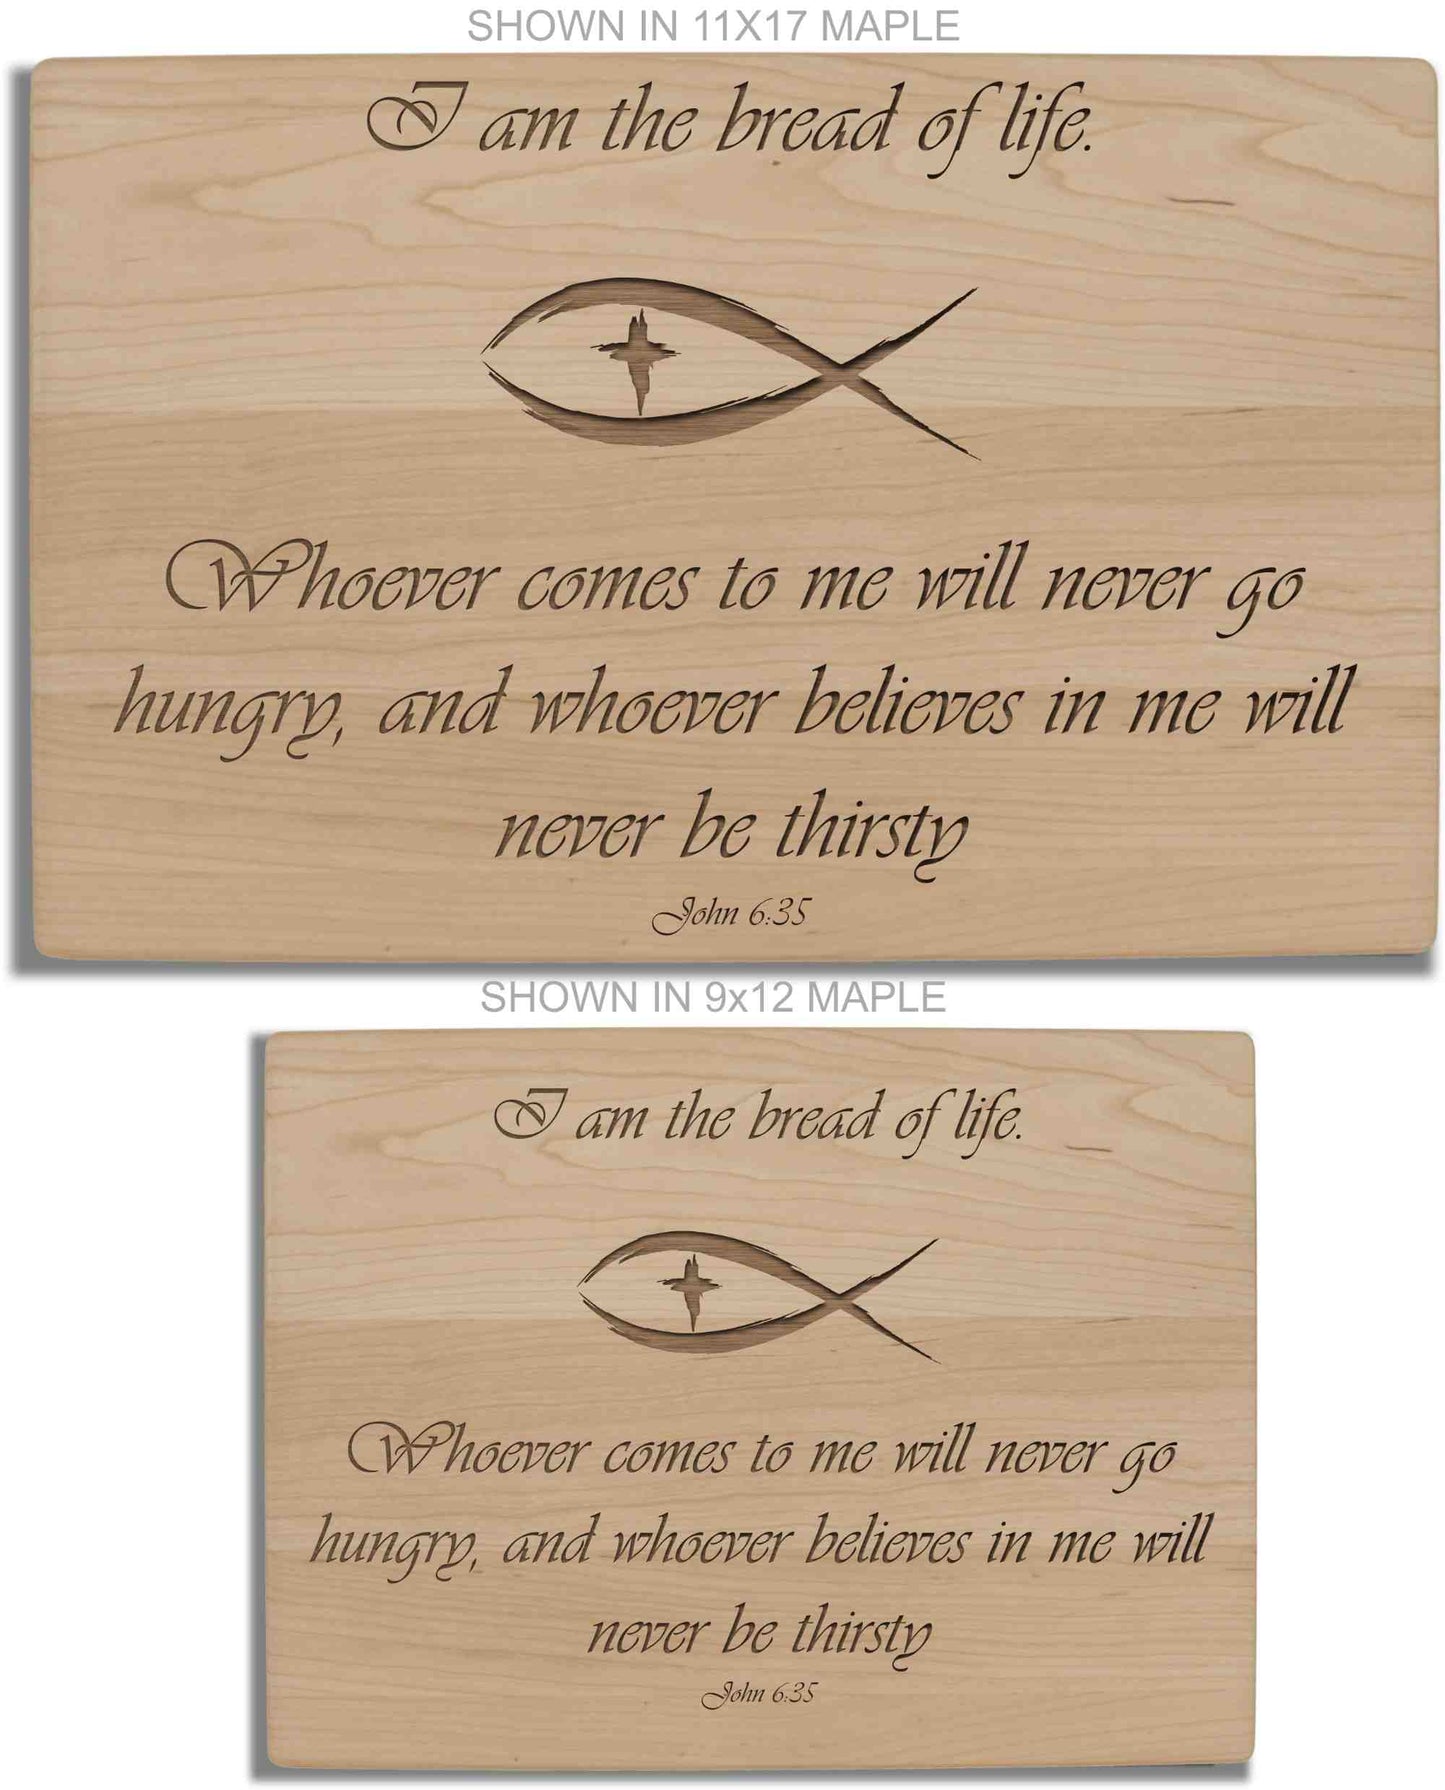 Taste And See That The Lord Is Good Personalized Cutting Board